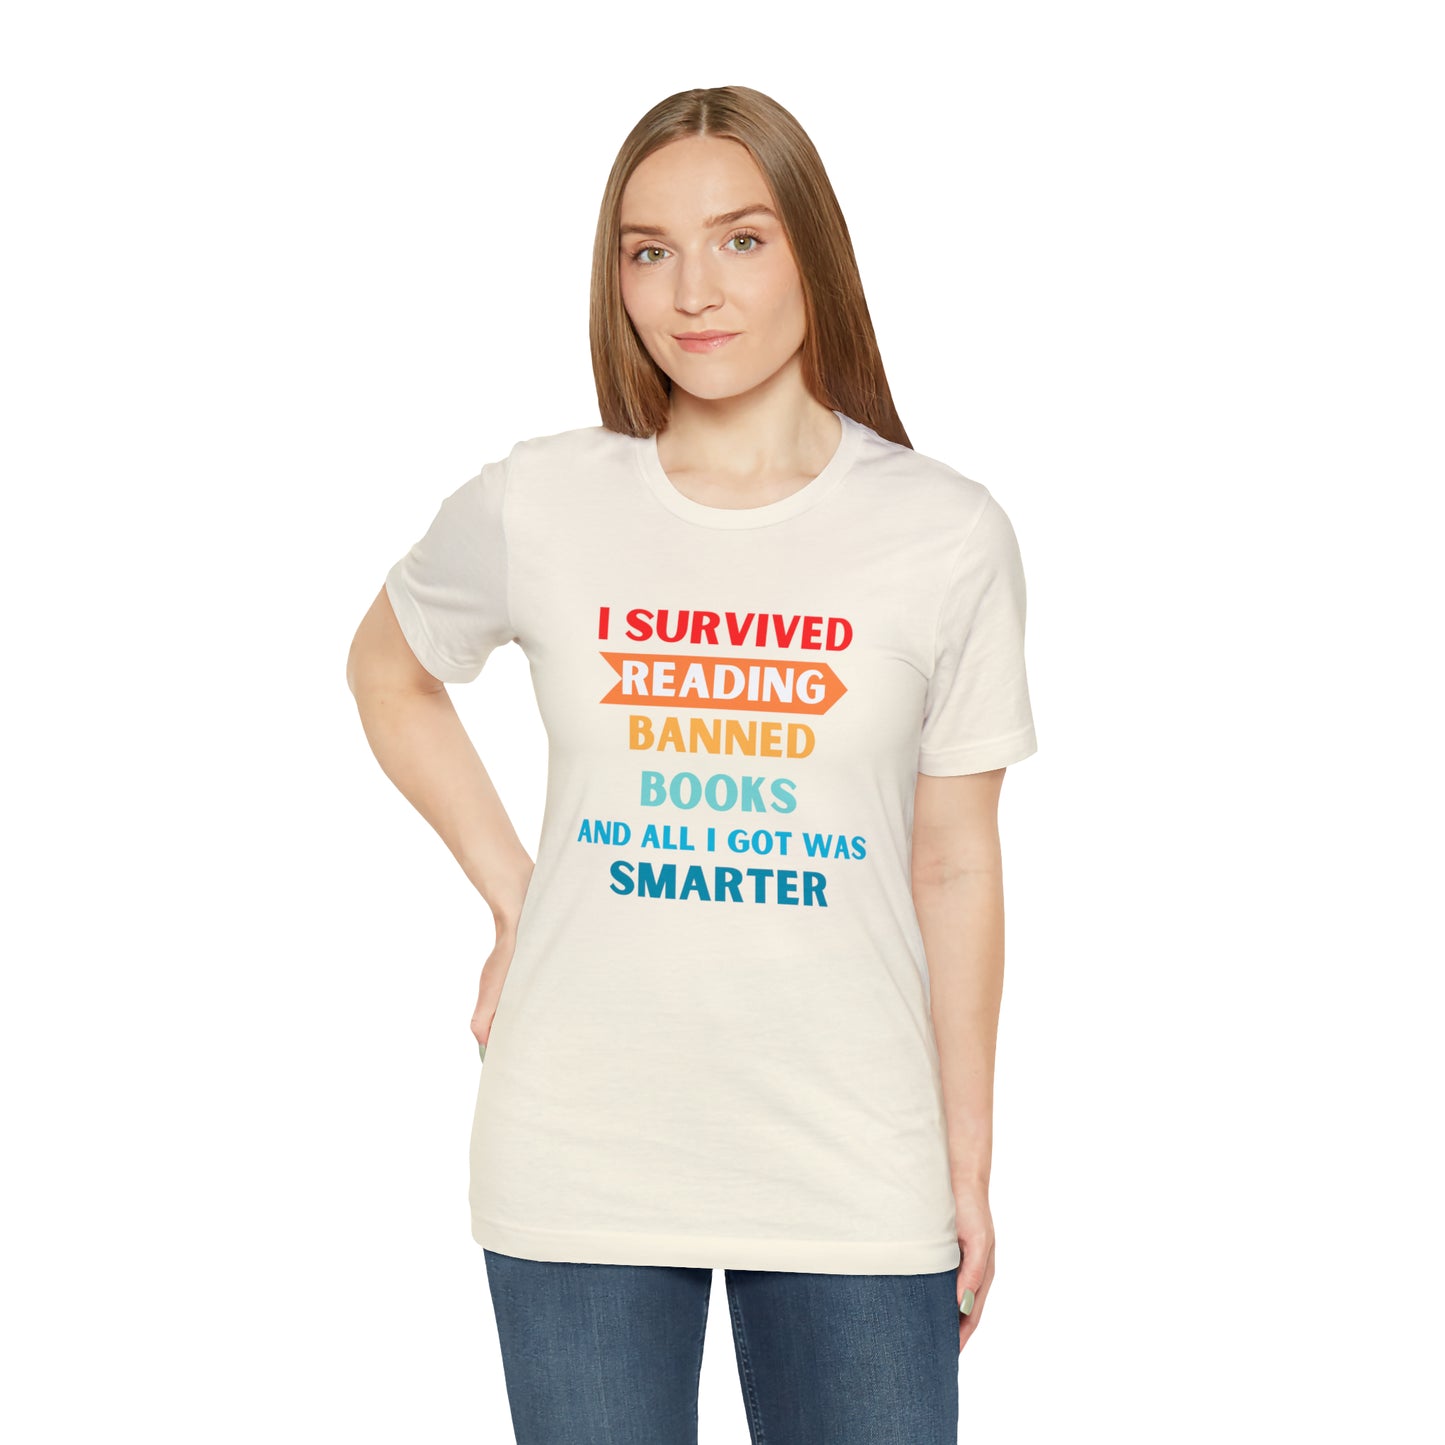 I Survived Reading Banned Books And All I Got Was Smarter, Library Tshirt, book lover, bookish, librarian gift, gift for reader